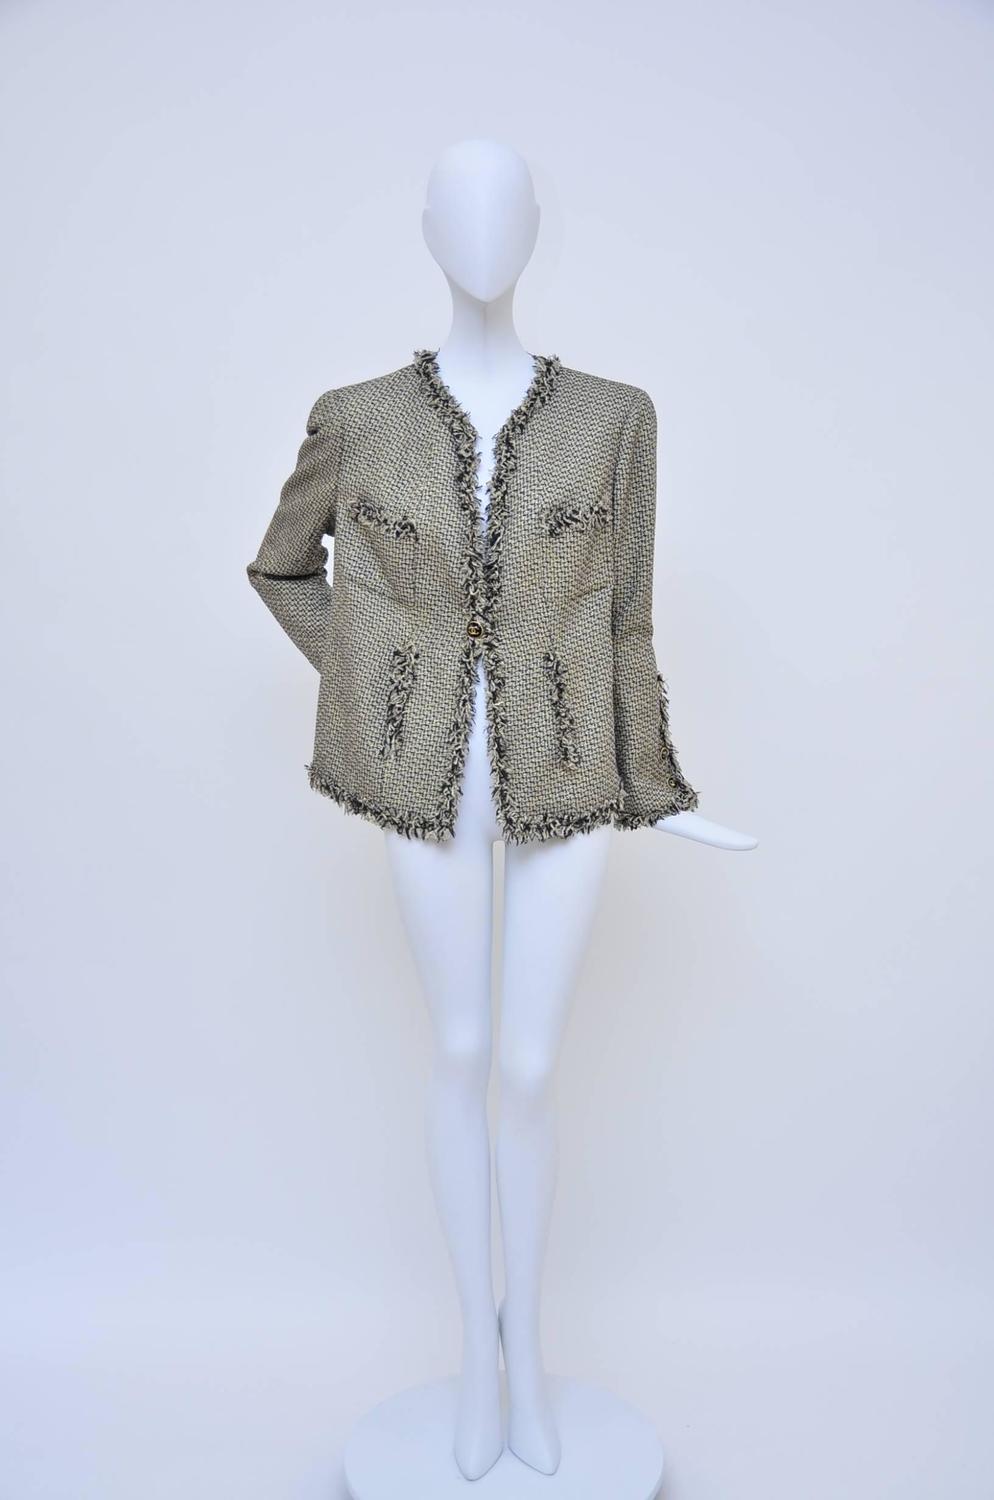 CHANEL Runway 2007 Tweed Jacket Mint For Sale at 1stdibs